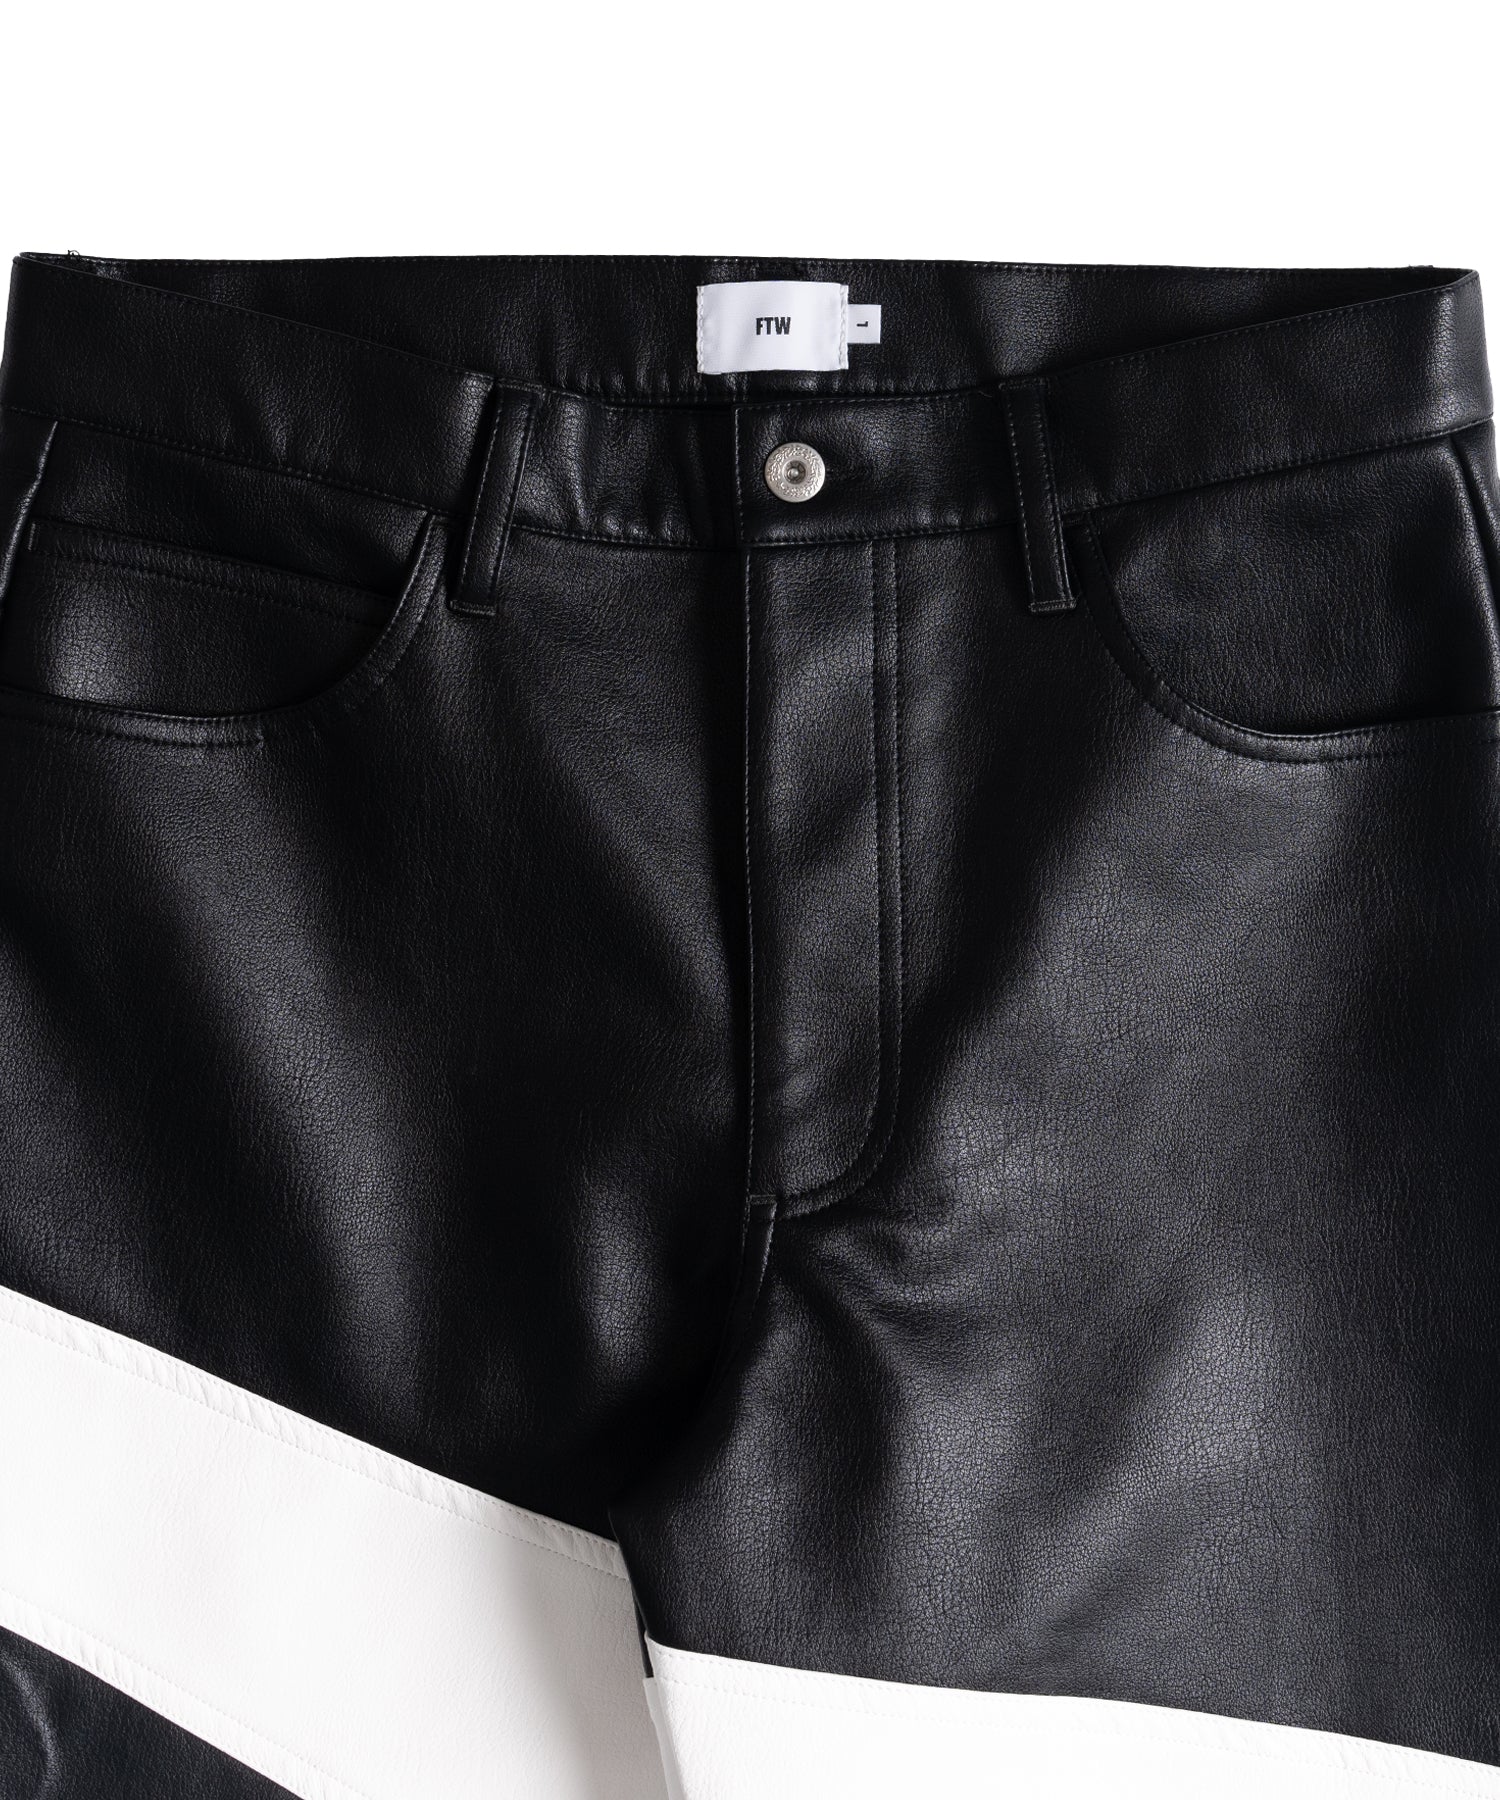 DIVISION LEATHER PANTS